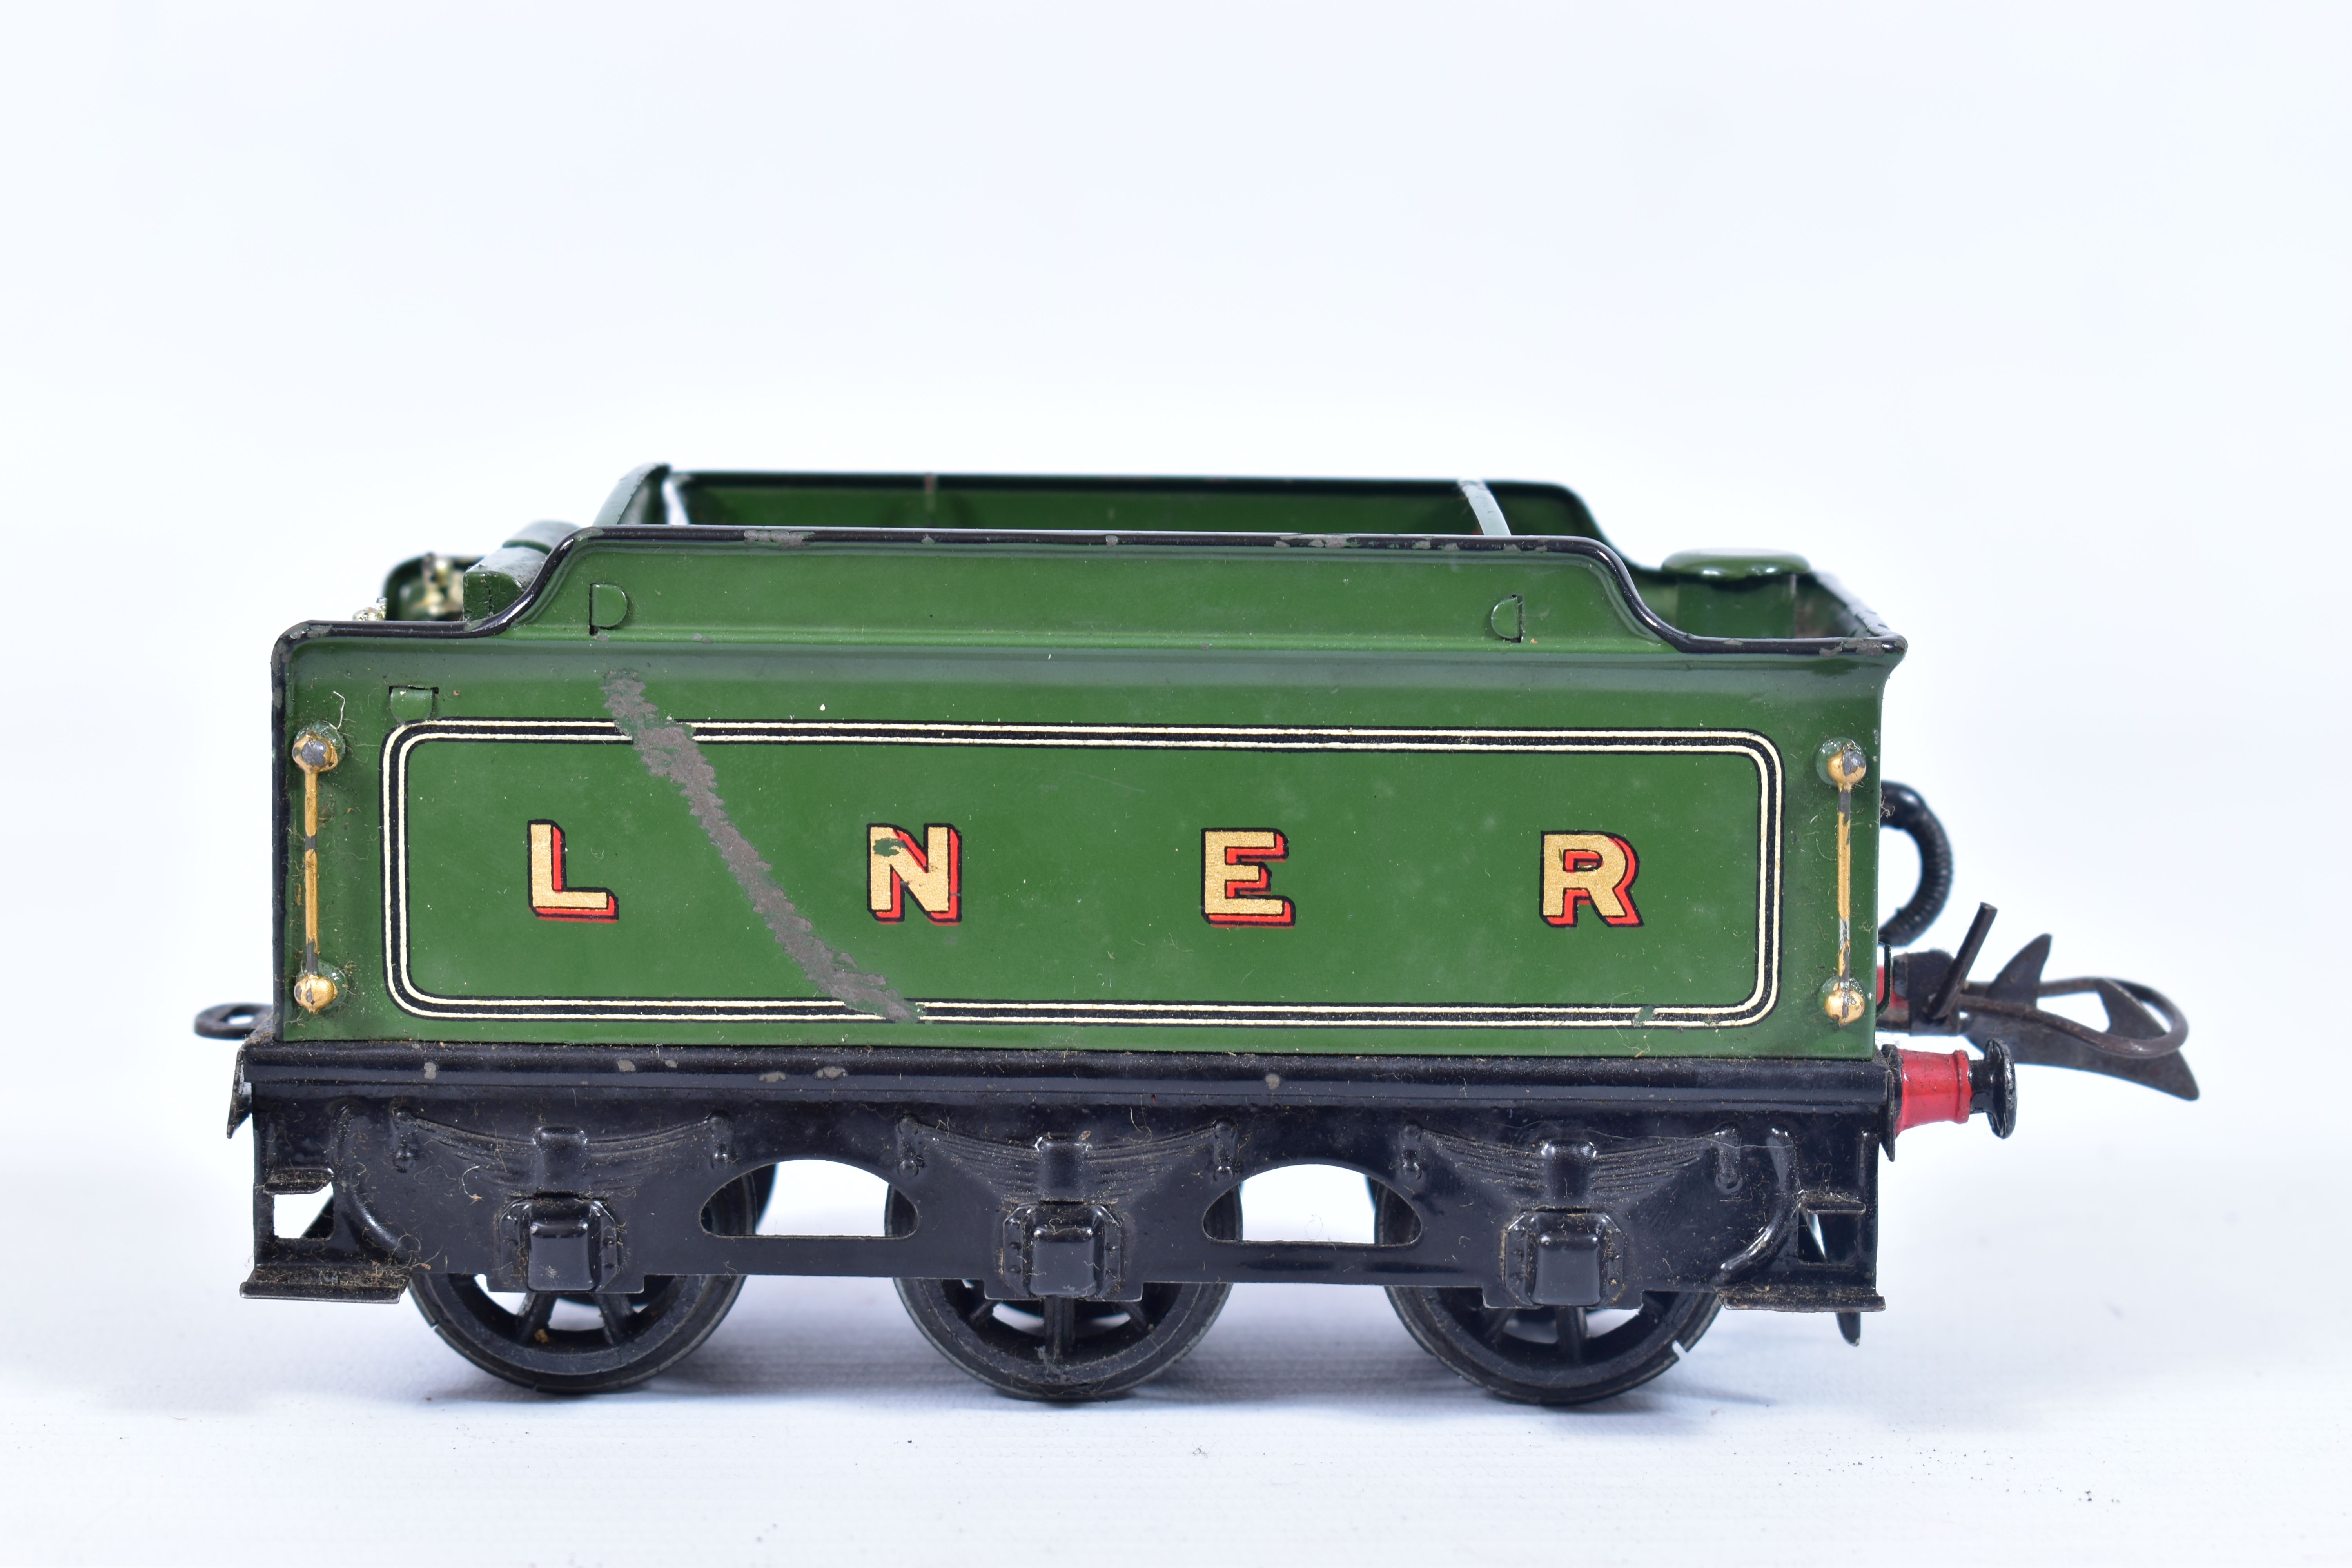 A HORNBY O GAUGE No.3 LOCOMOTIVE AND TENDER, 'Flying Scotsman' No.4472, L.N.E.R. lined green livery, - Image 26 of 39